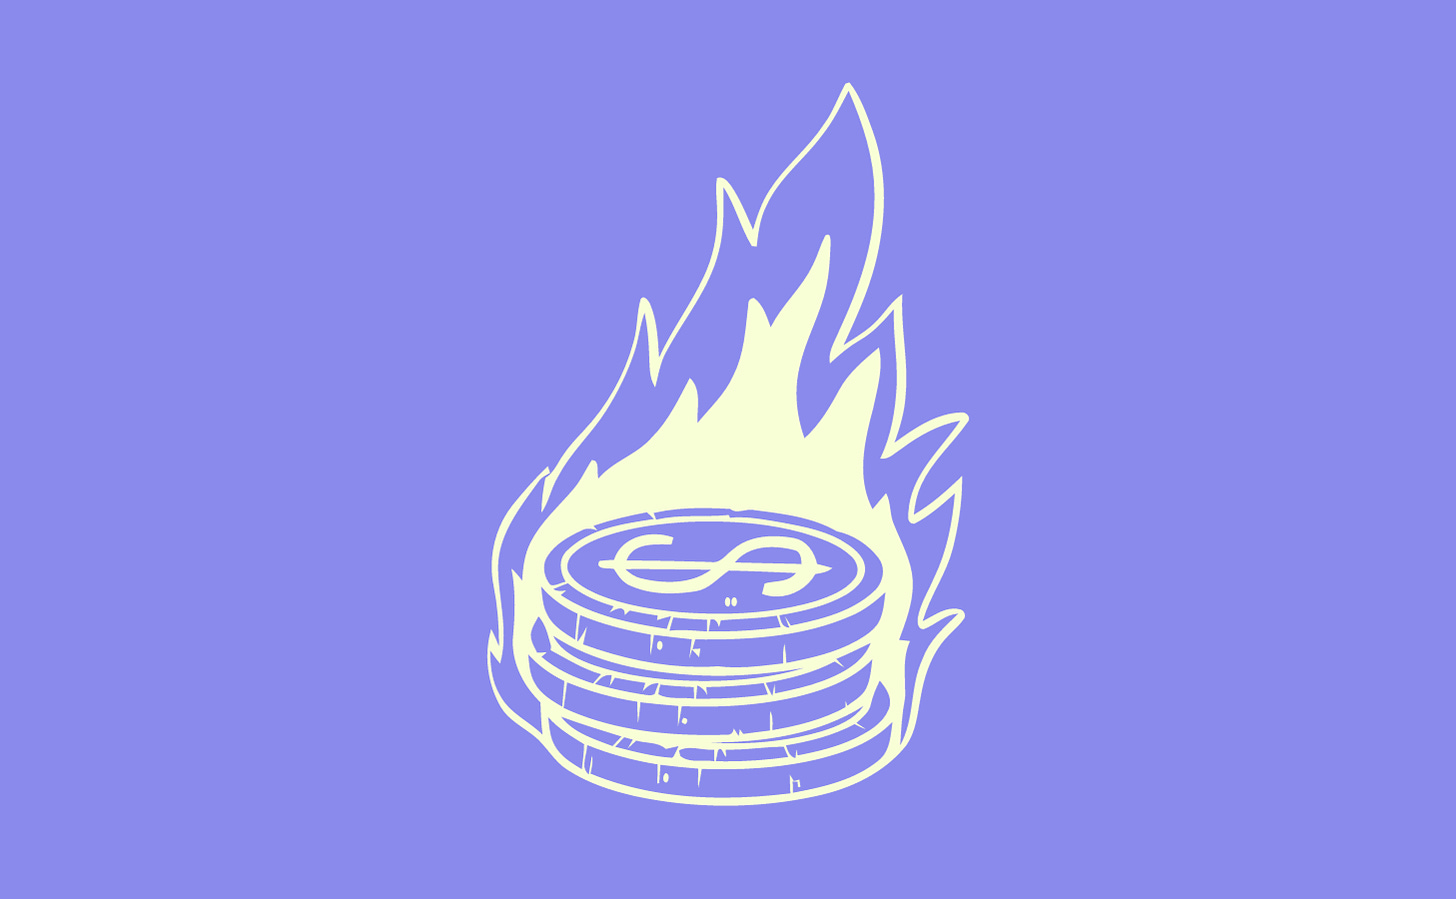 A doodle of coins on fire.